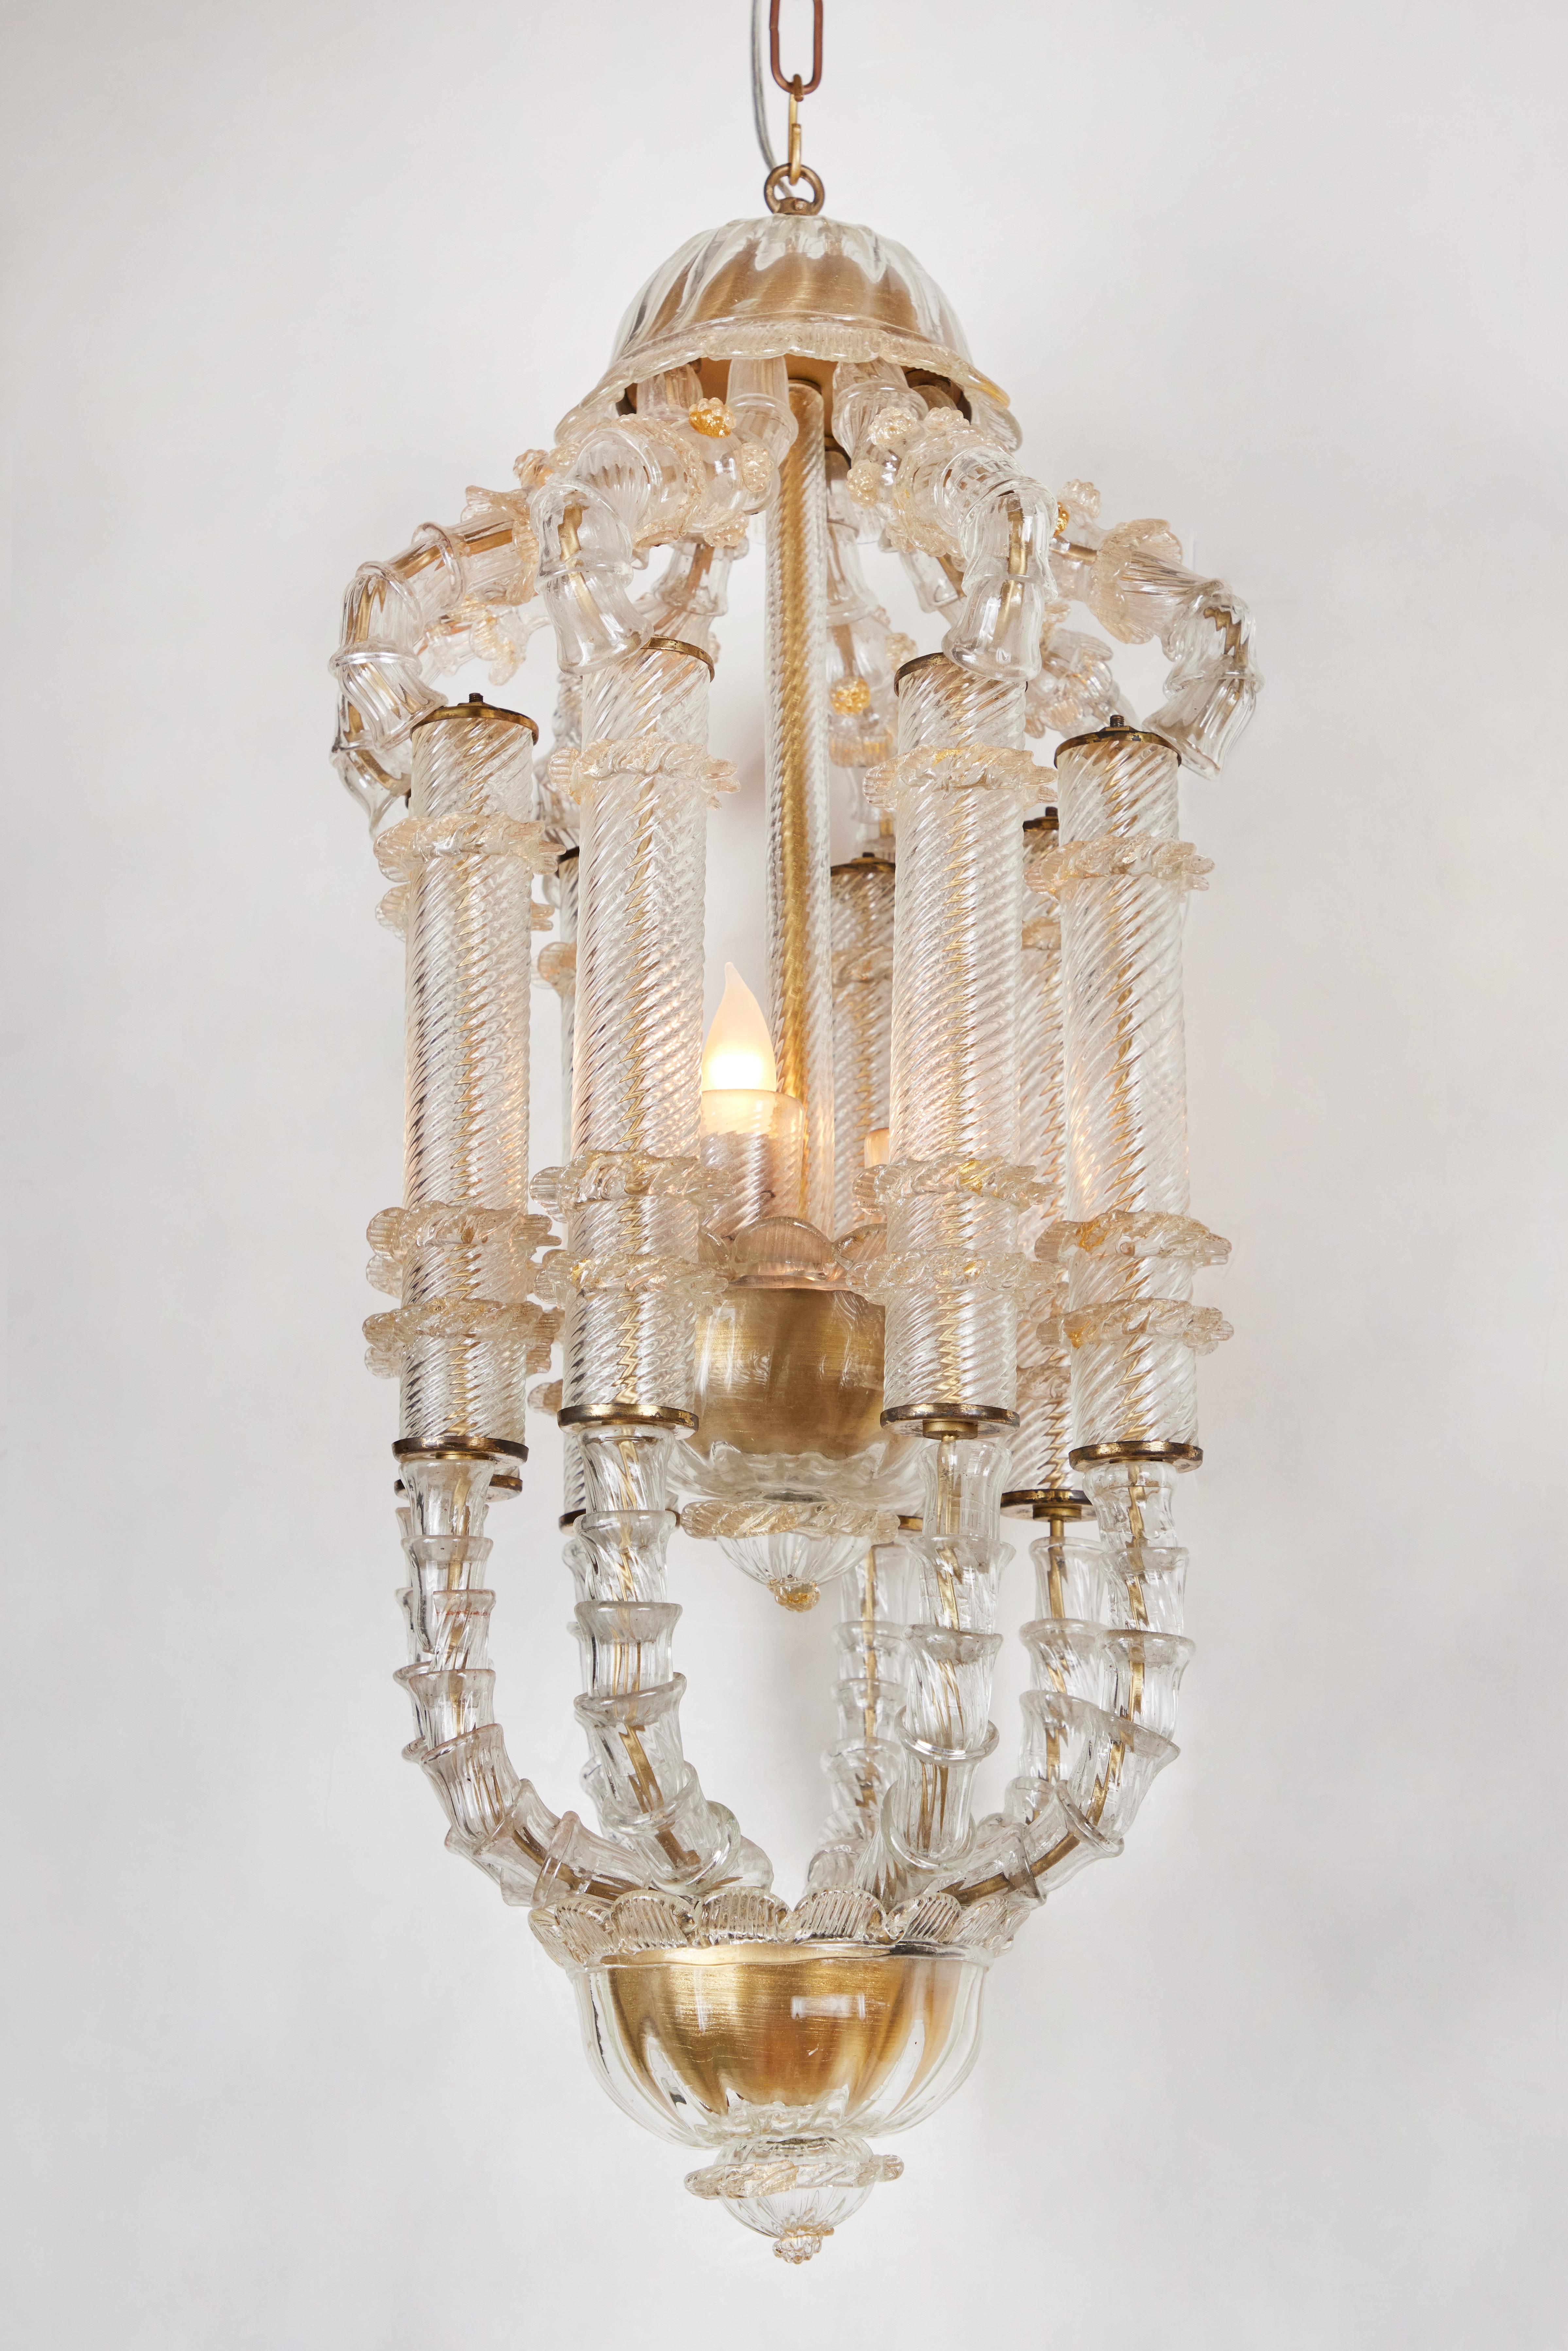 A detailed, Venetian glass lantern featuring a center circle of rigadin columns trimmed in foliate style embellishments between upper and lower registers of elegant supports with raised details. The crown, center dish, and base are fitted with gilt